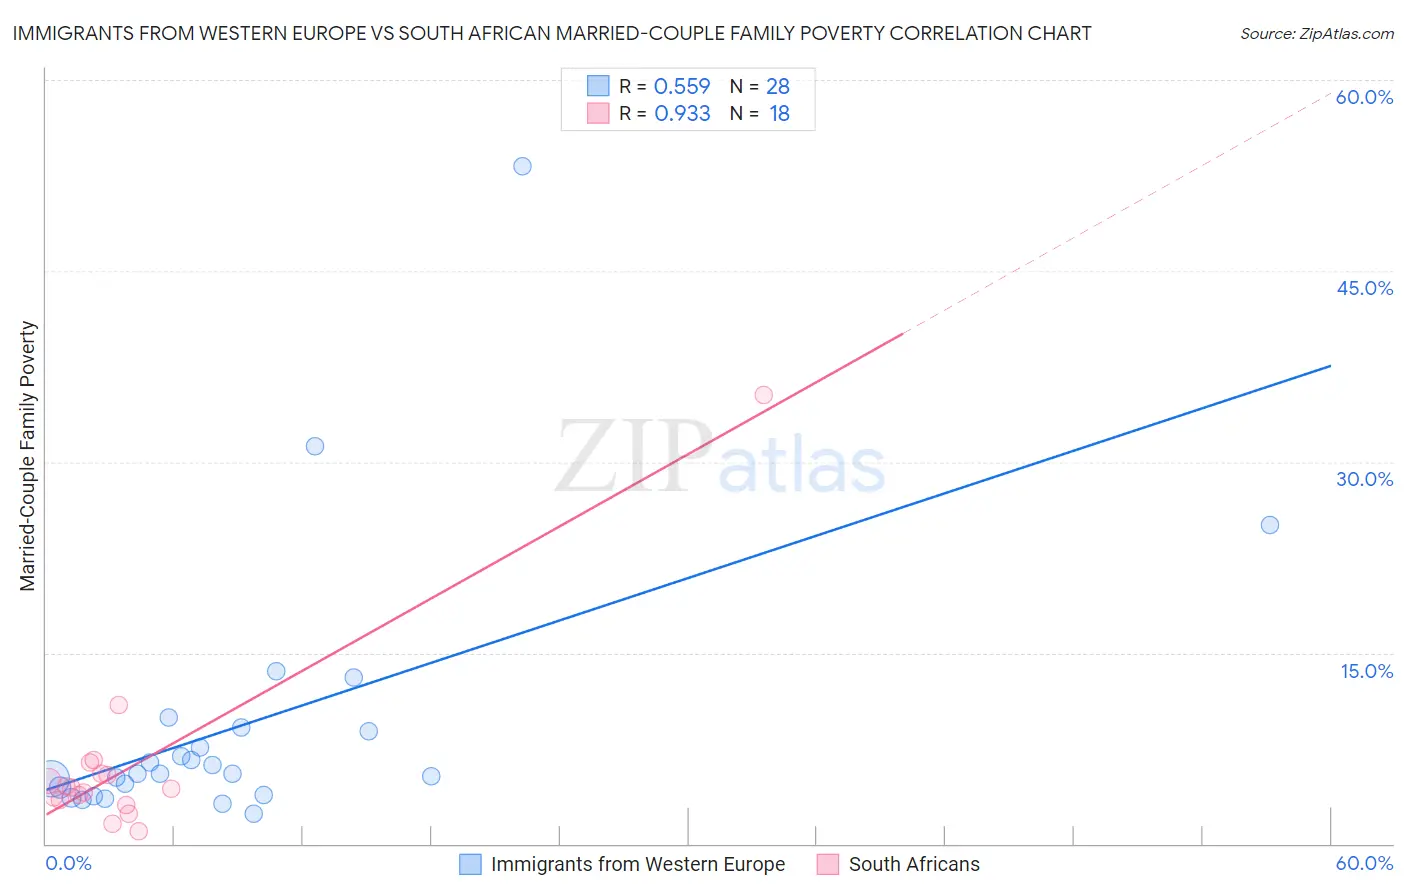 Immigrants from Western Europe vs South African Married-Couple Family Poverty